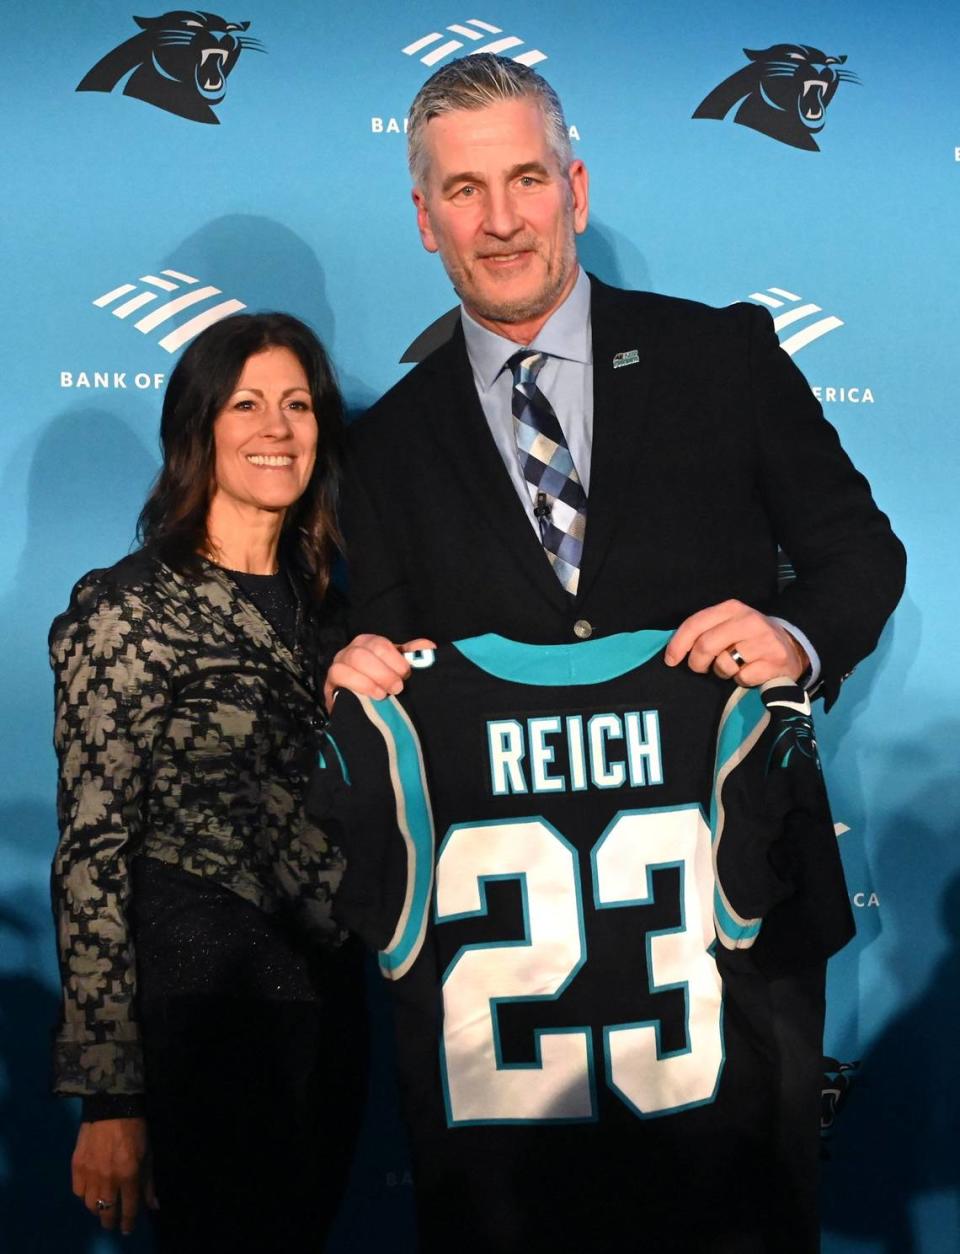 New Carolina Panthers head coach Frank Reich, right and his wife, Linda Reich, left, pose for photographs following his introductory press conference at Bank of America Stadium on Tuesday, January 31, 2023.